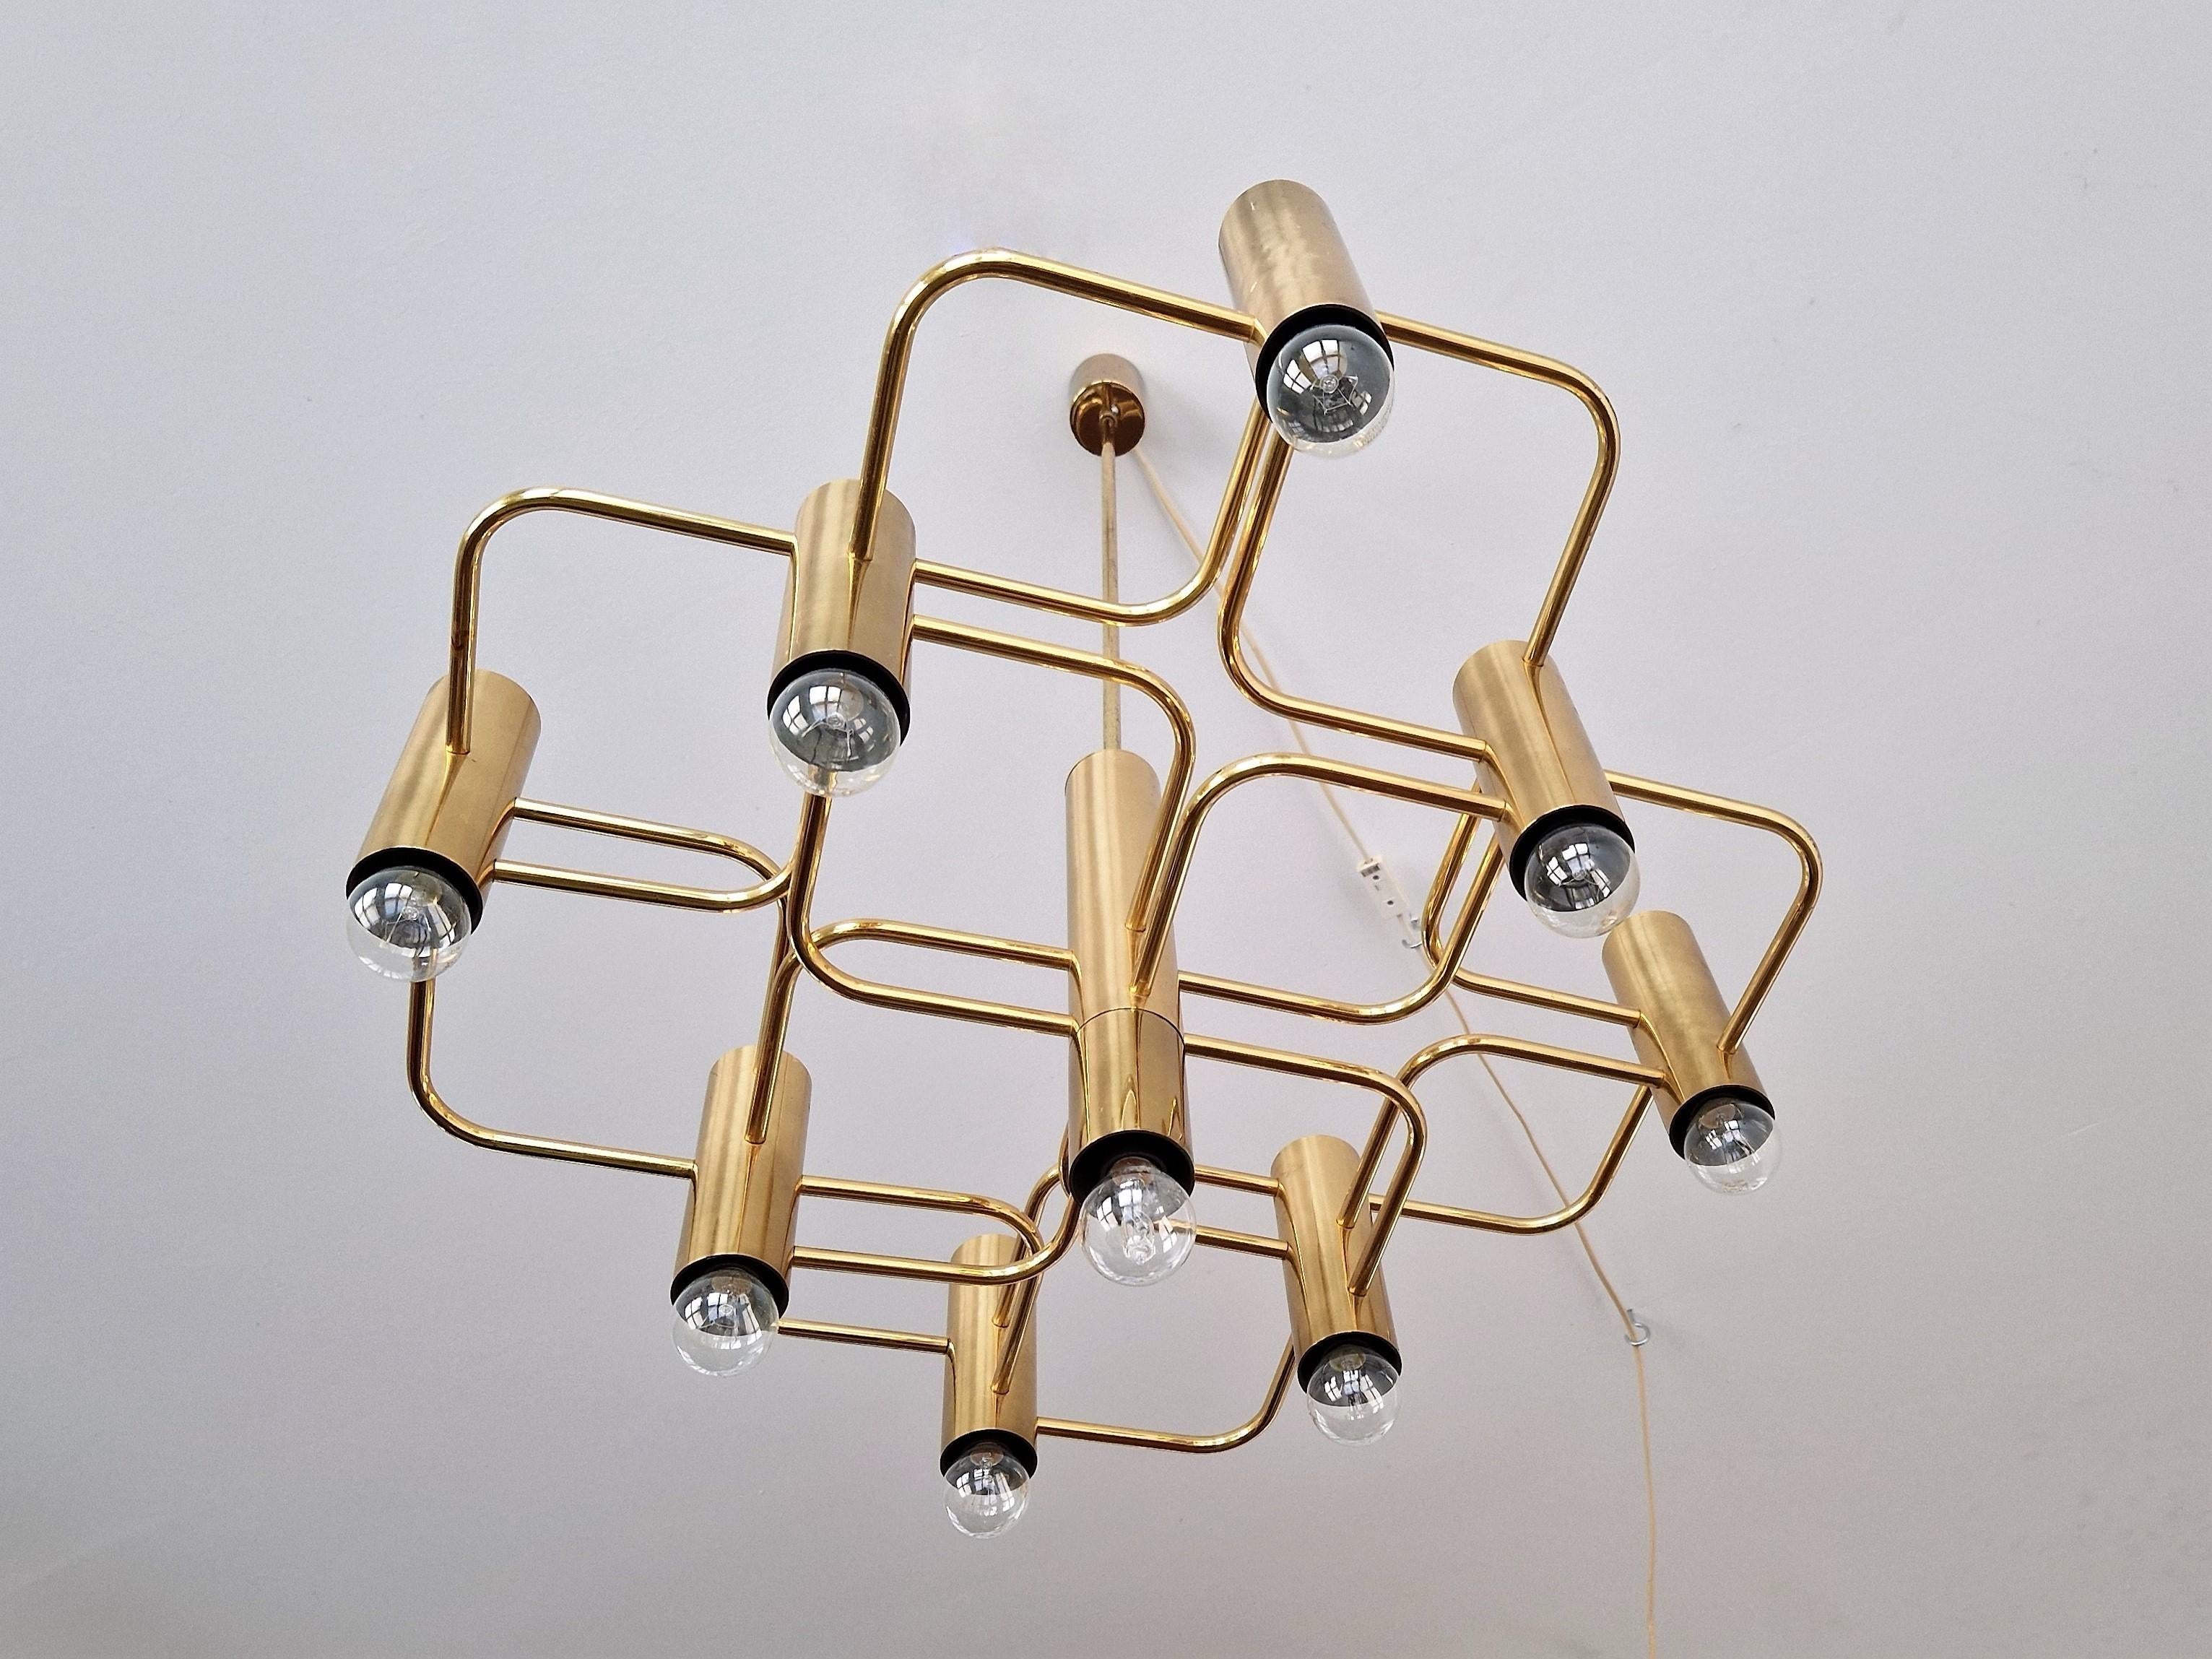 This beautiful and elegant brass chandelier was designed by Angelo Gaetano Sciolari for S.A. Boulanger in Belgium in the 1970's. Sciolari was inspired by the atomic structure (for example the Belgian Atomium) and the contemporary modernist